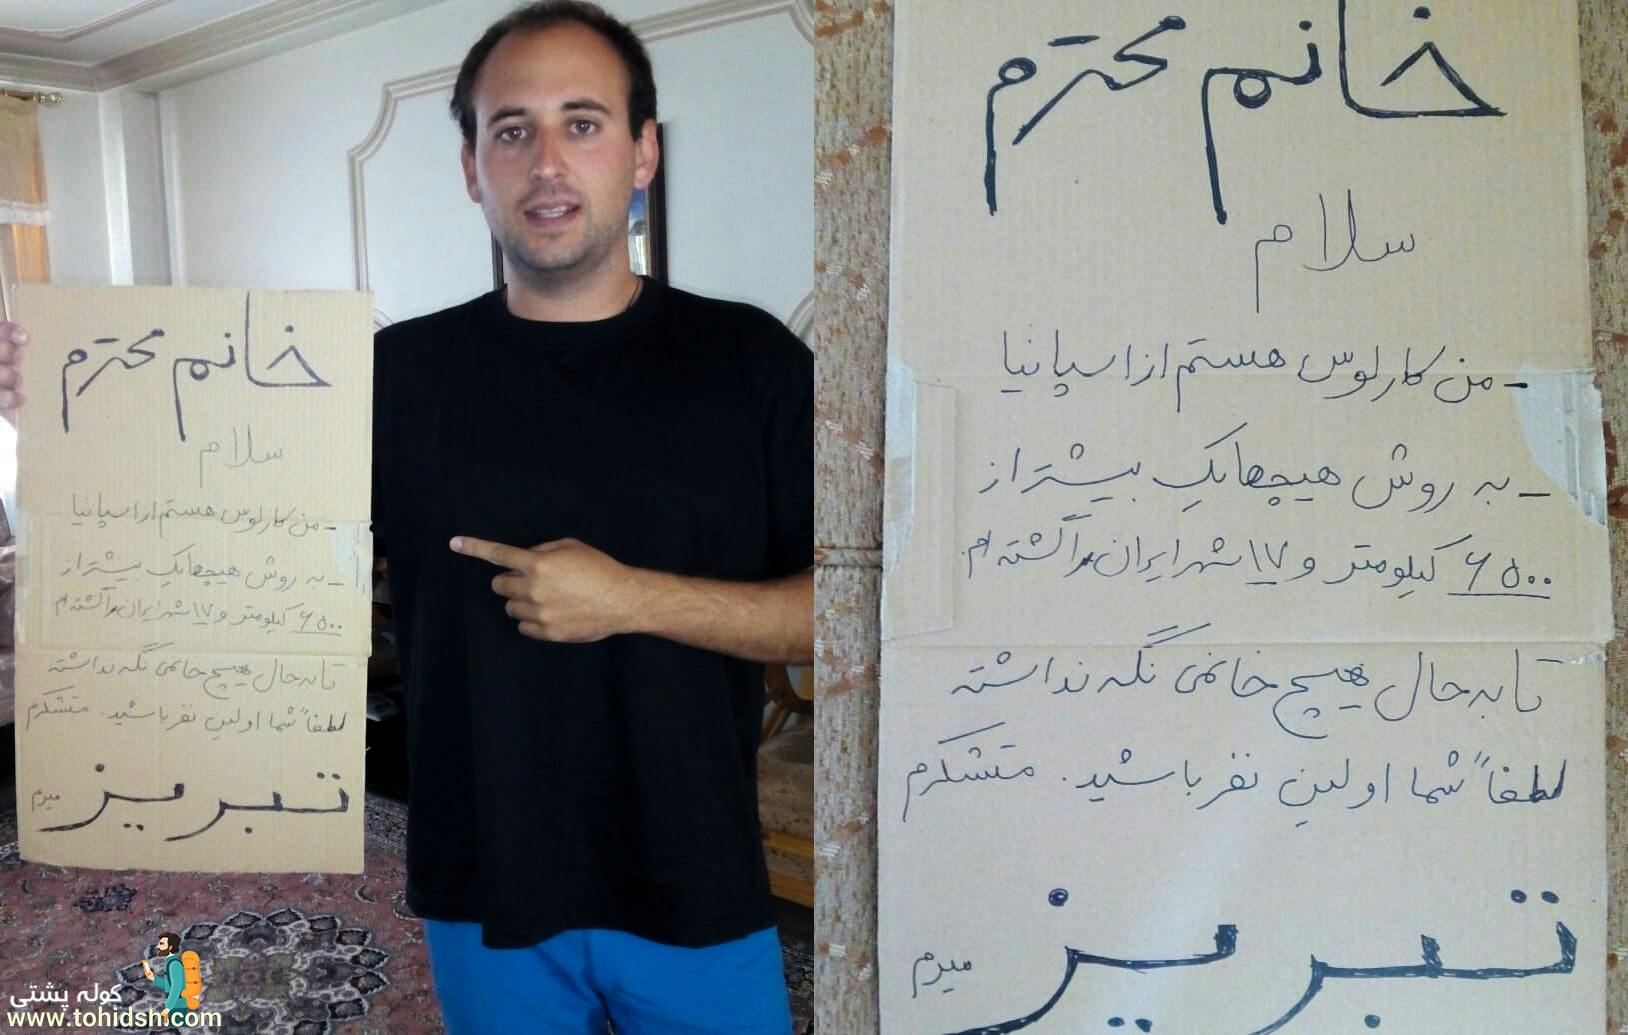 Hitchhiking in Iran; The adventure of a Spanish turned into a tragedy